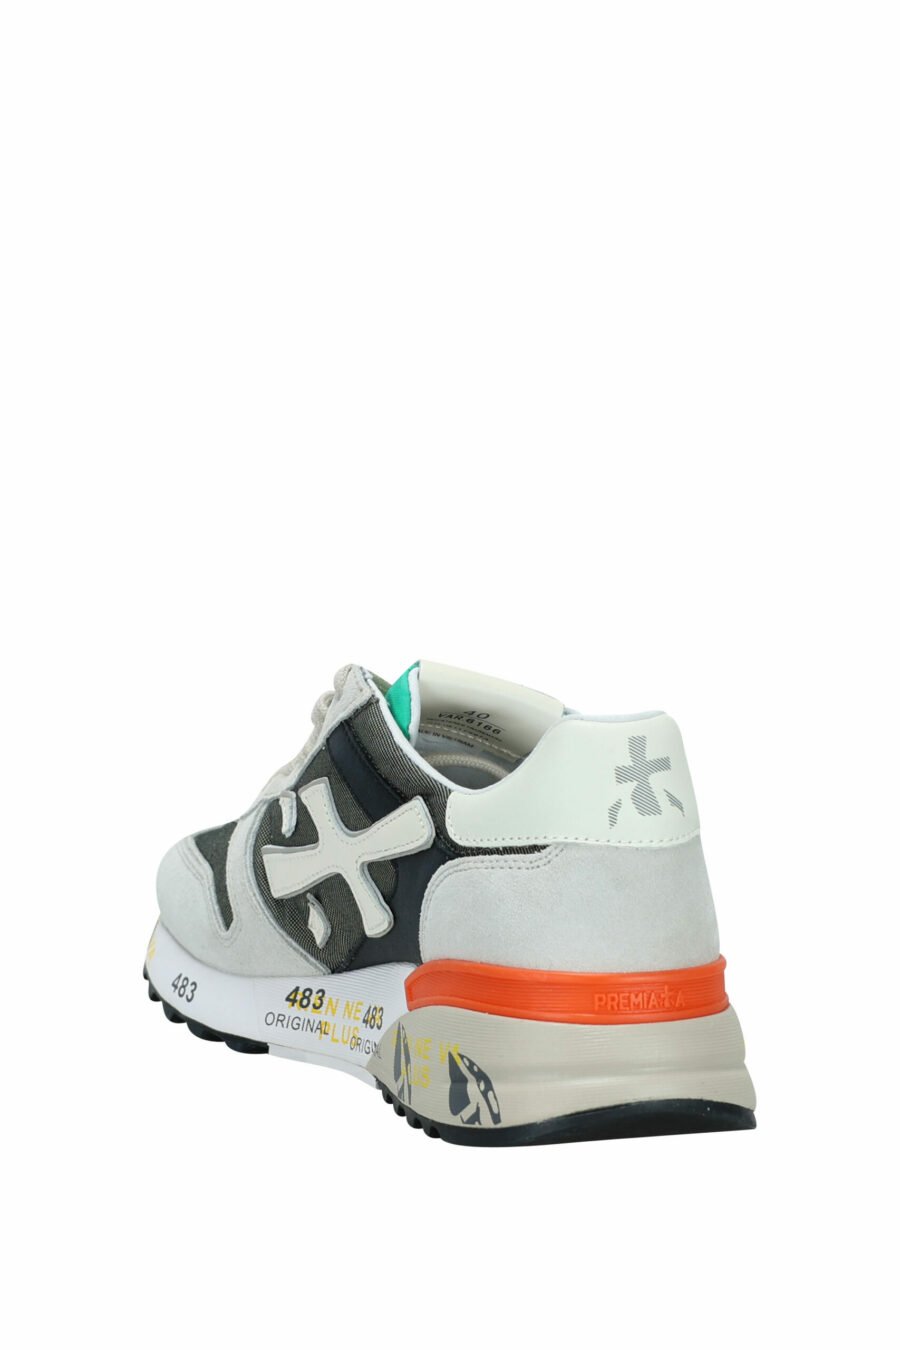 Grey mix trainers with orange "mick 6166" - 8058326250854 3 scaled